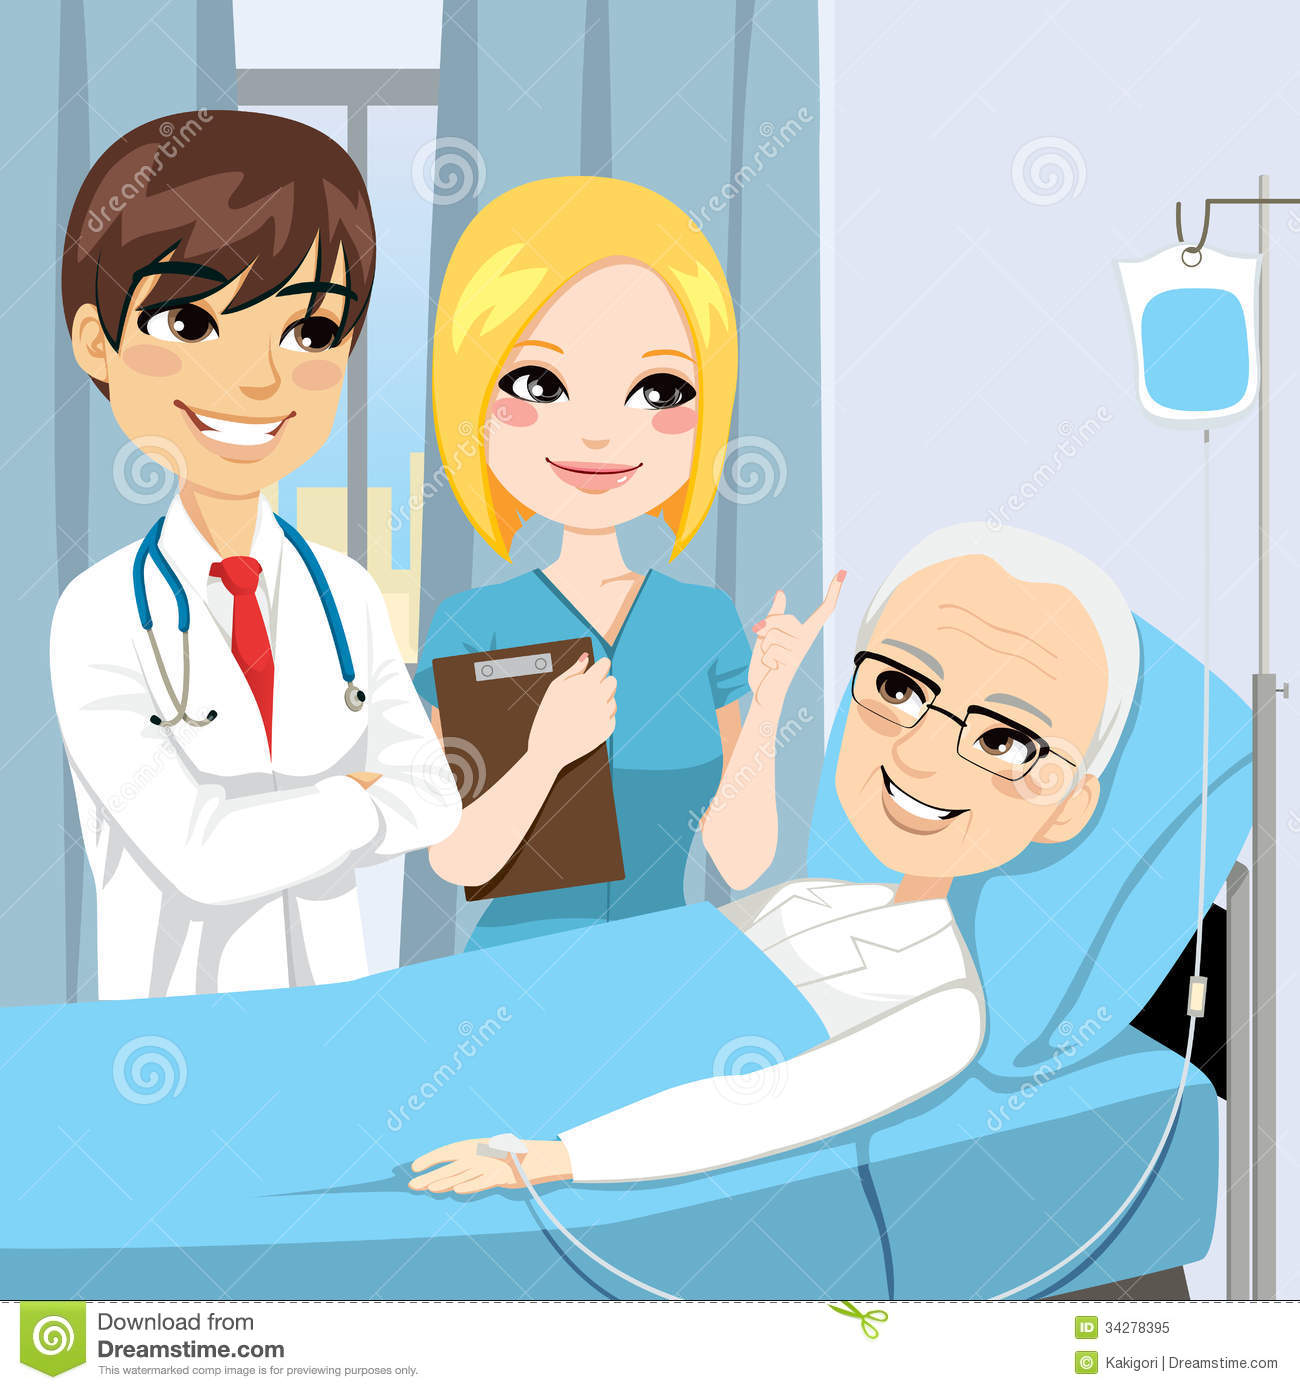 Doctor Visit Senior Patient Royalty Free Stock Photo   Image  34278395